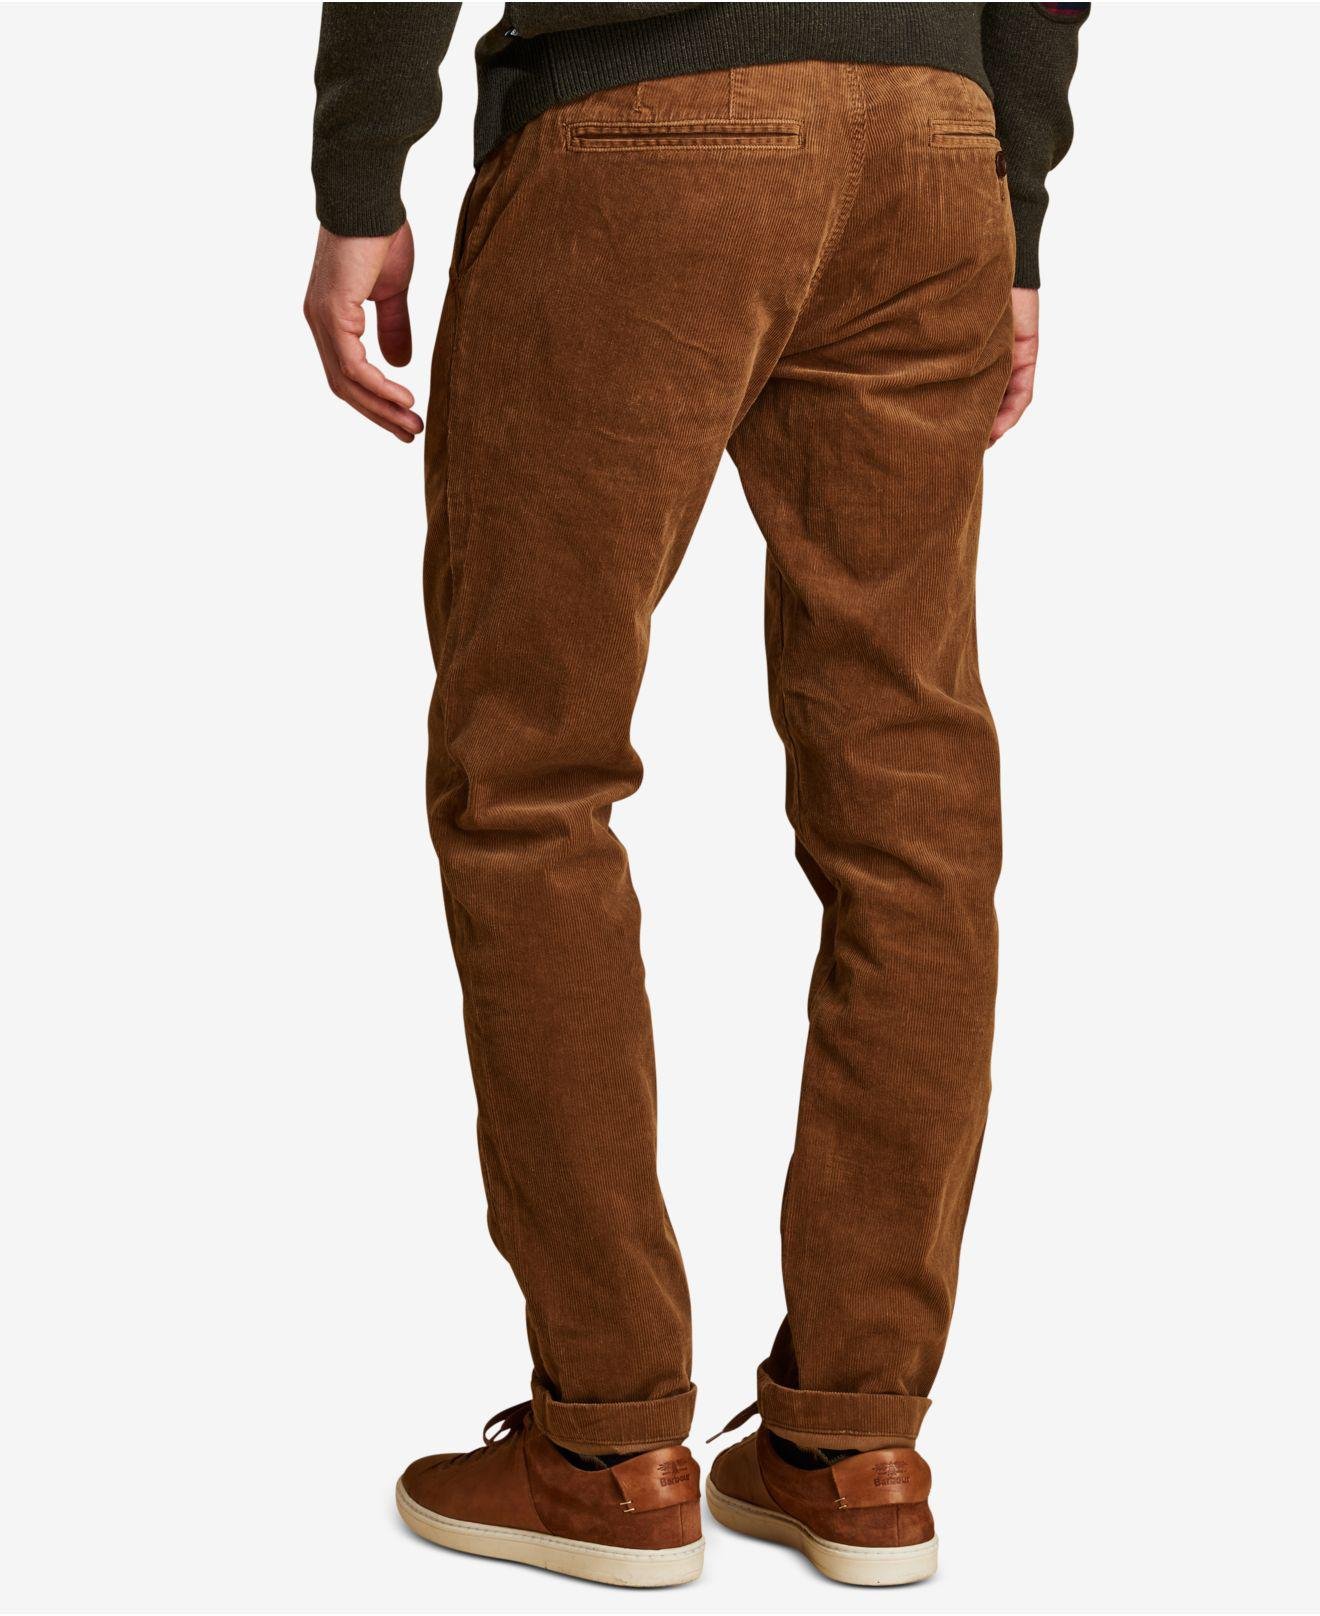 Lyst - Barbour Neuston Stretch Corduroy Pants in Brown for Men